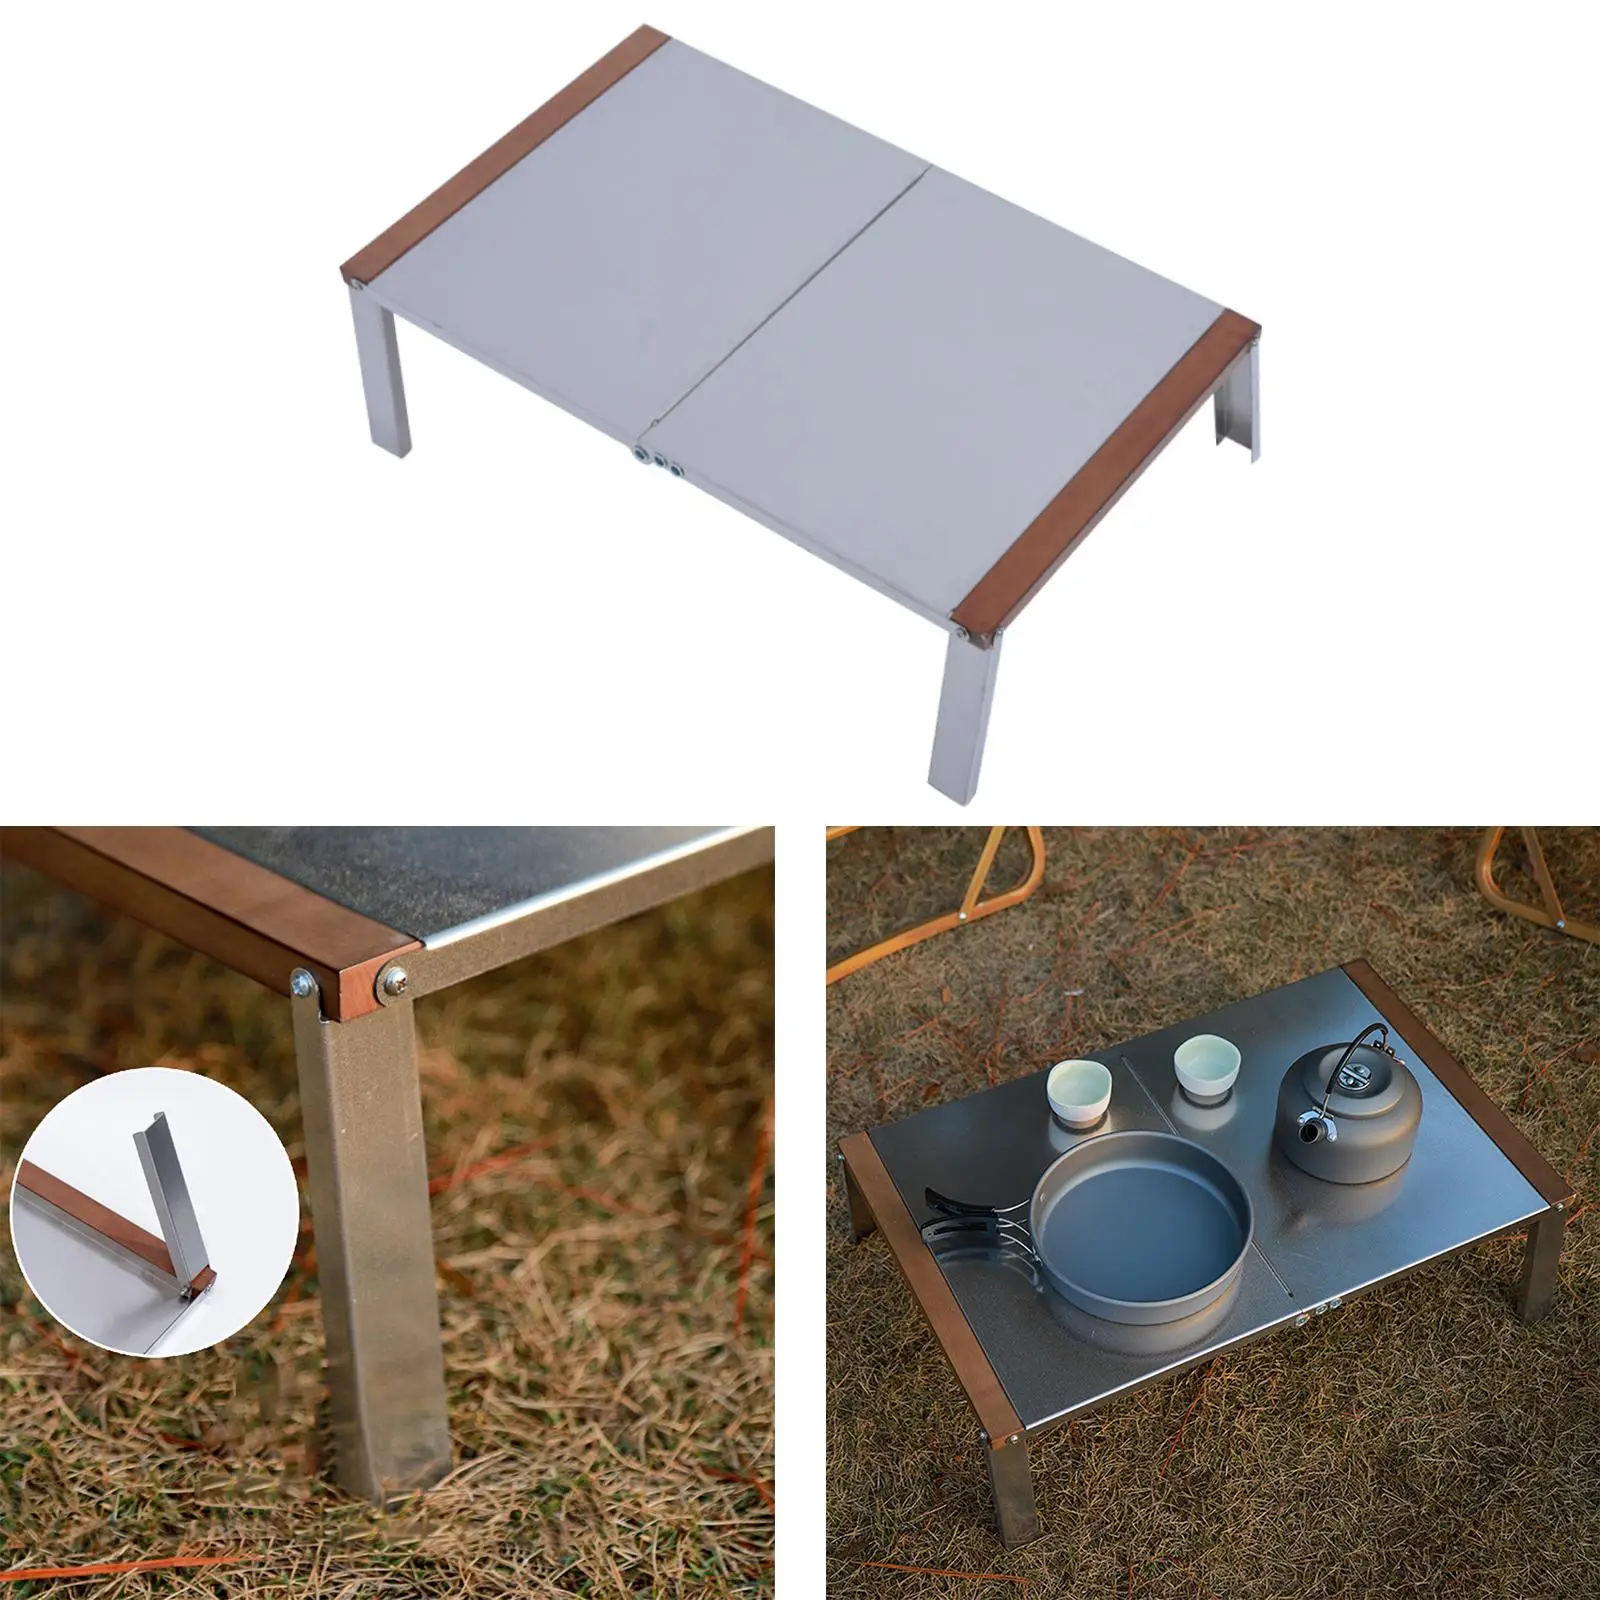 Folding Camping Table Portable Picnic Table Lightweight Folding Table for Picnic Garden BBQ Fishing Beach Accessories